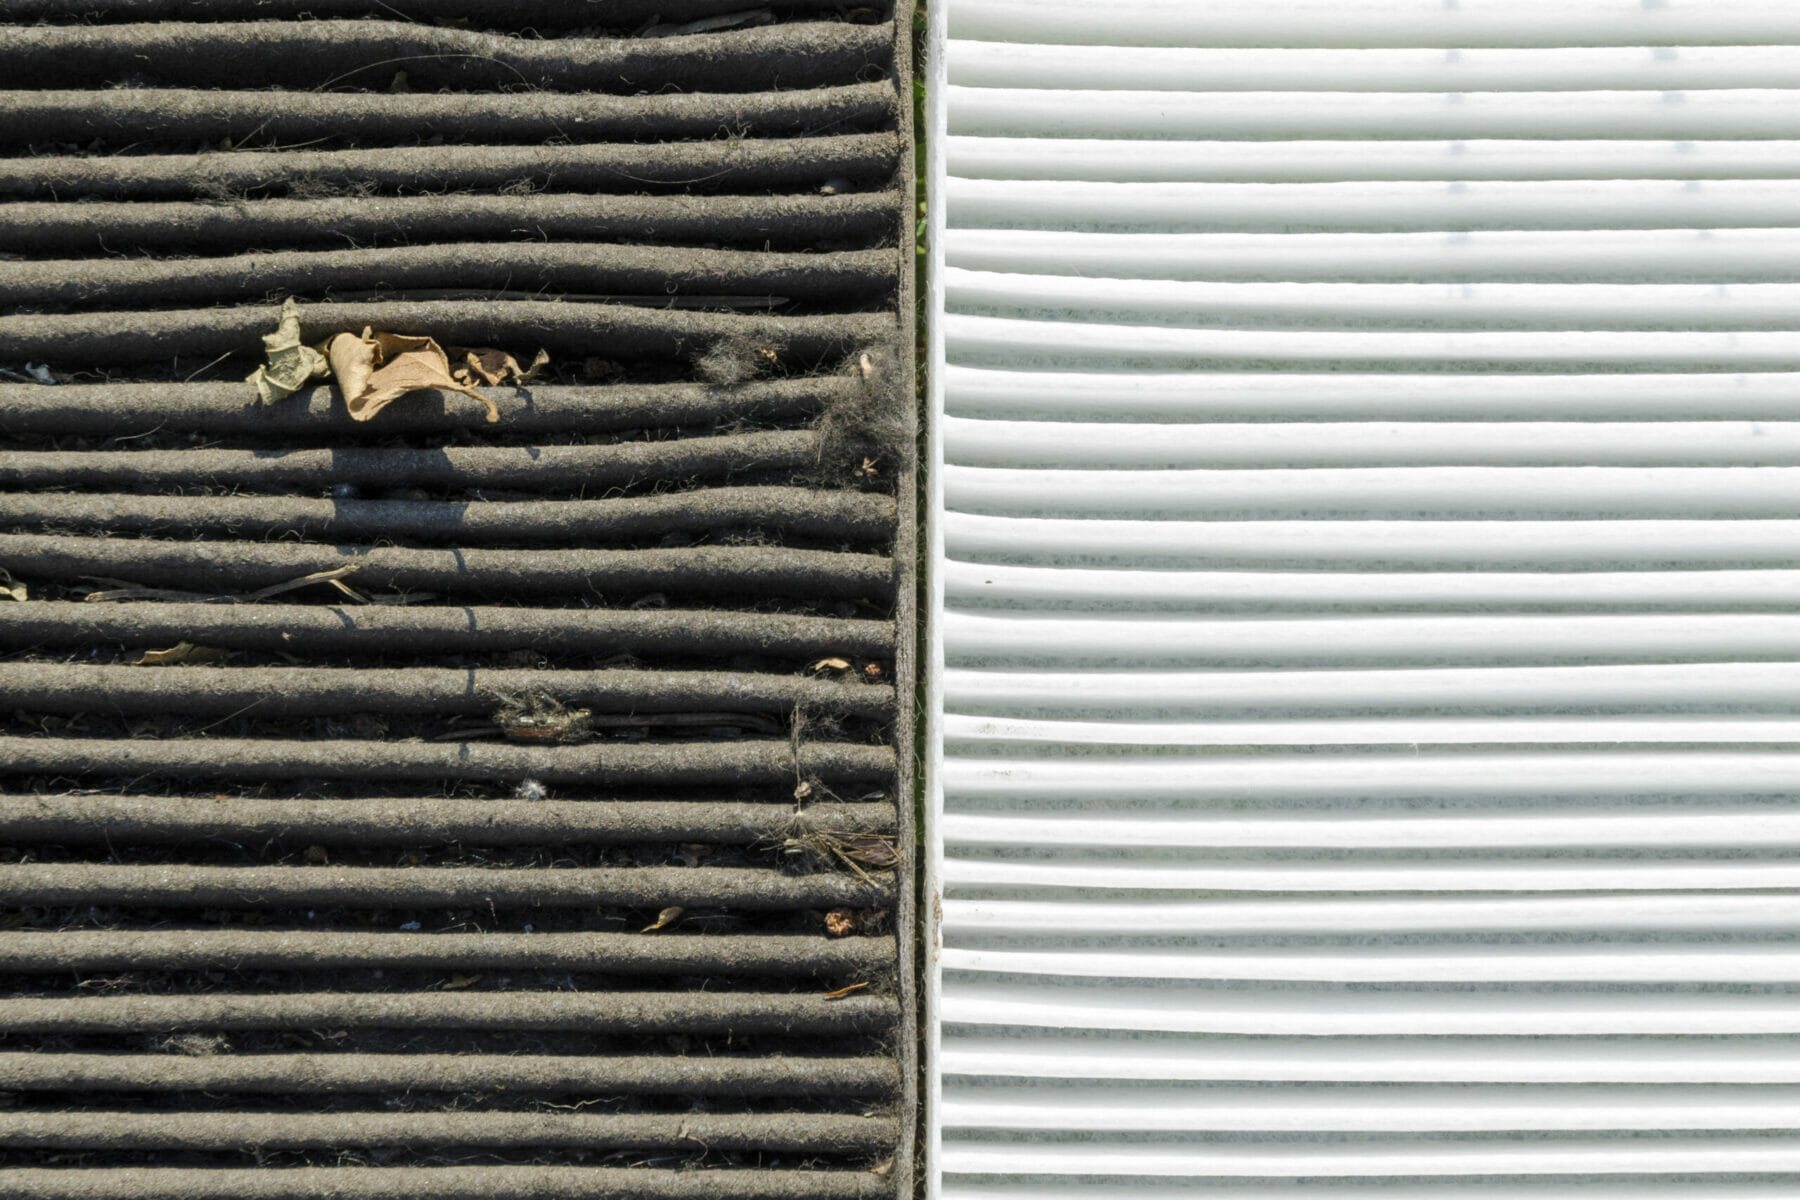 half by half fragments of dirty and clean air filters